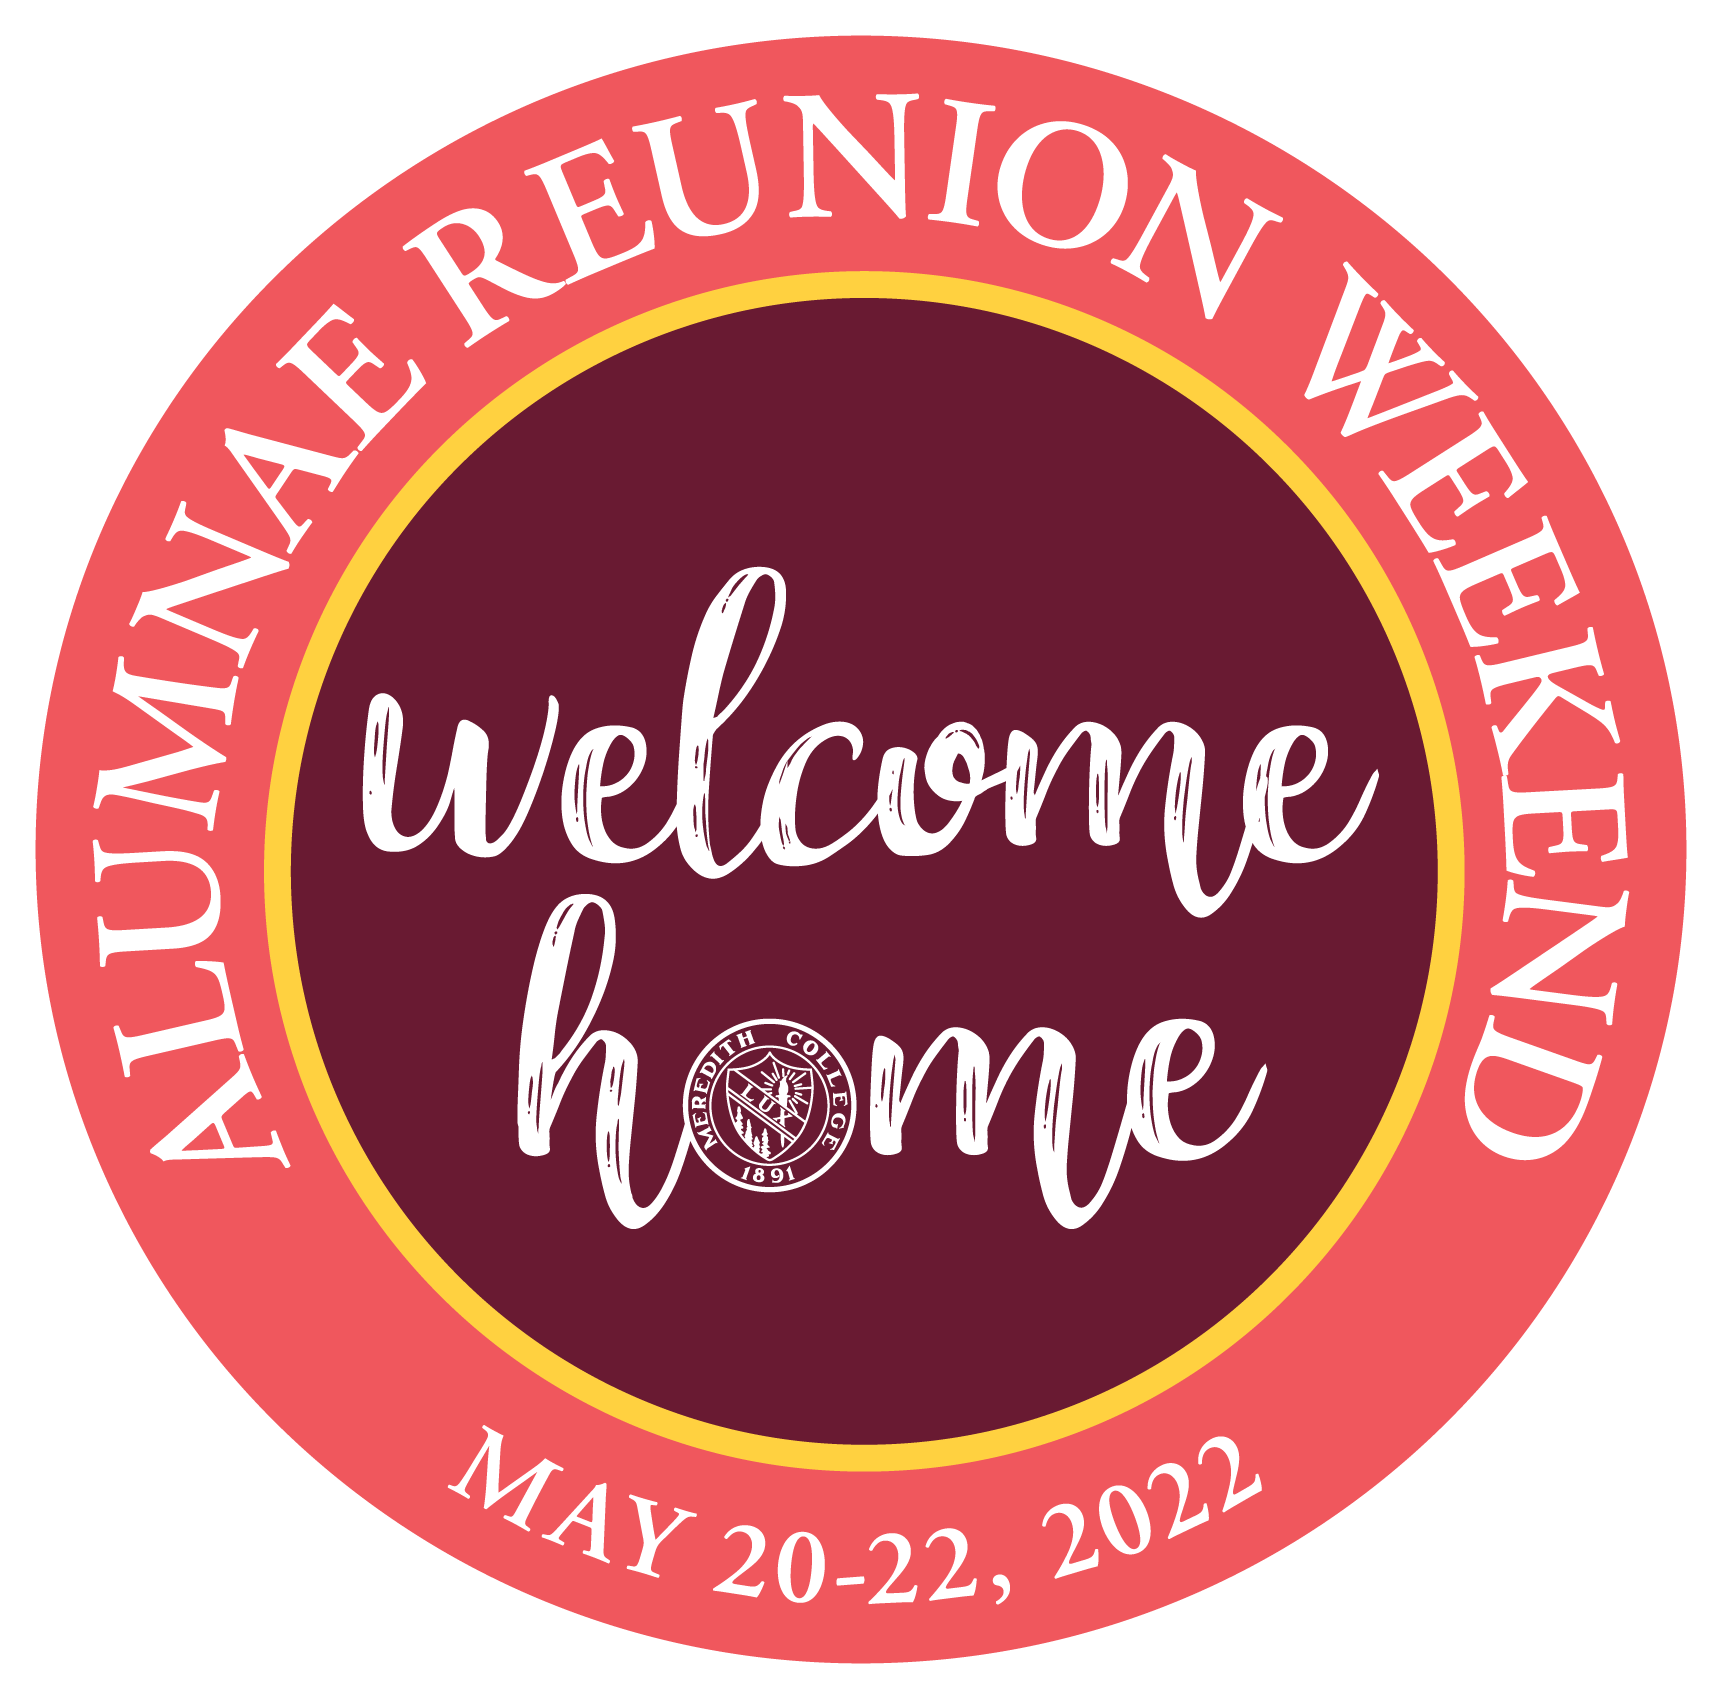 Circular logo that says "Welcome Home" on the inside, "Alumnae Reunion Weekend, May 20-22, 2022" on the outside.